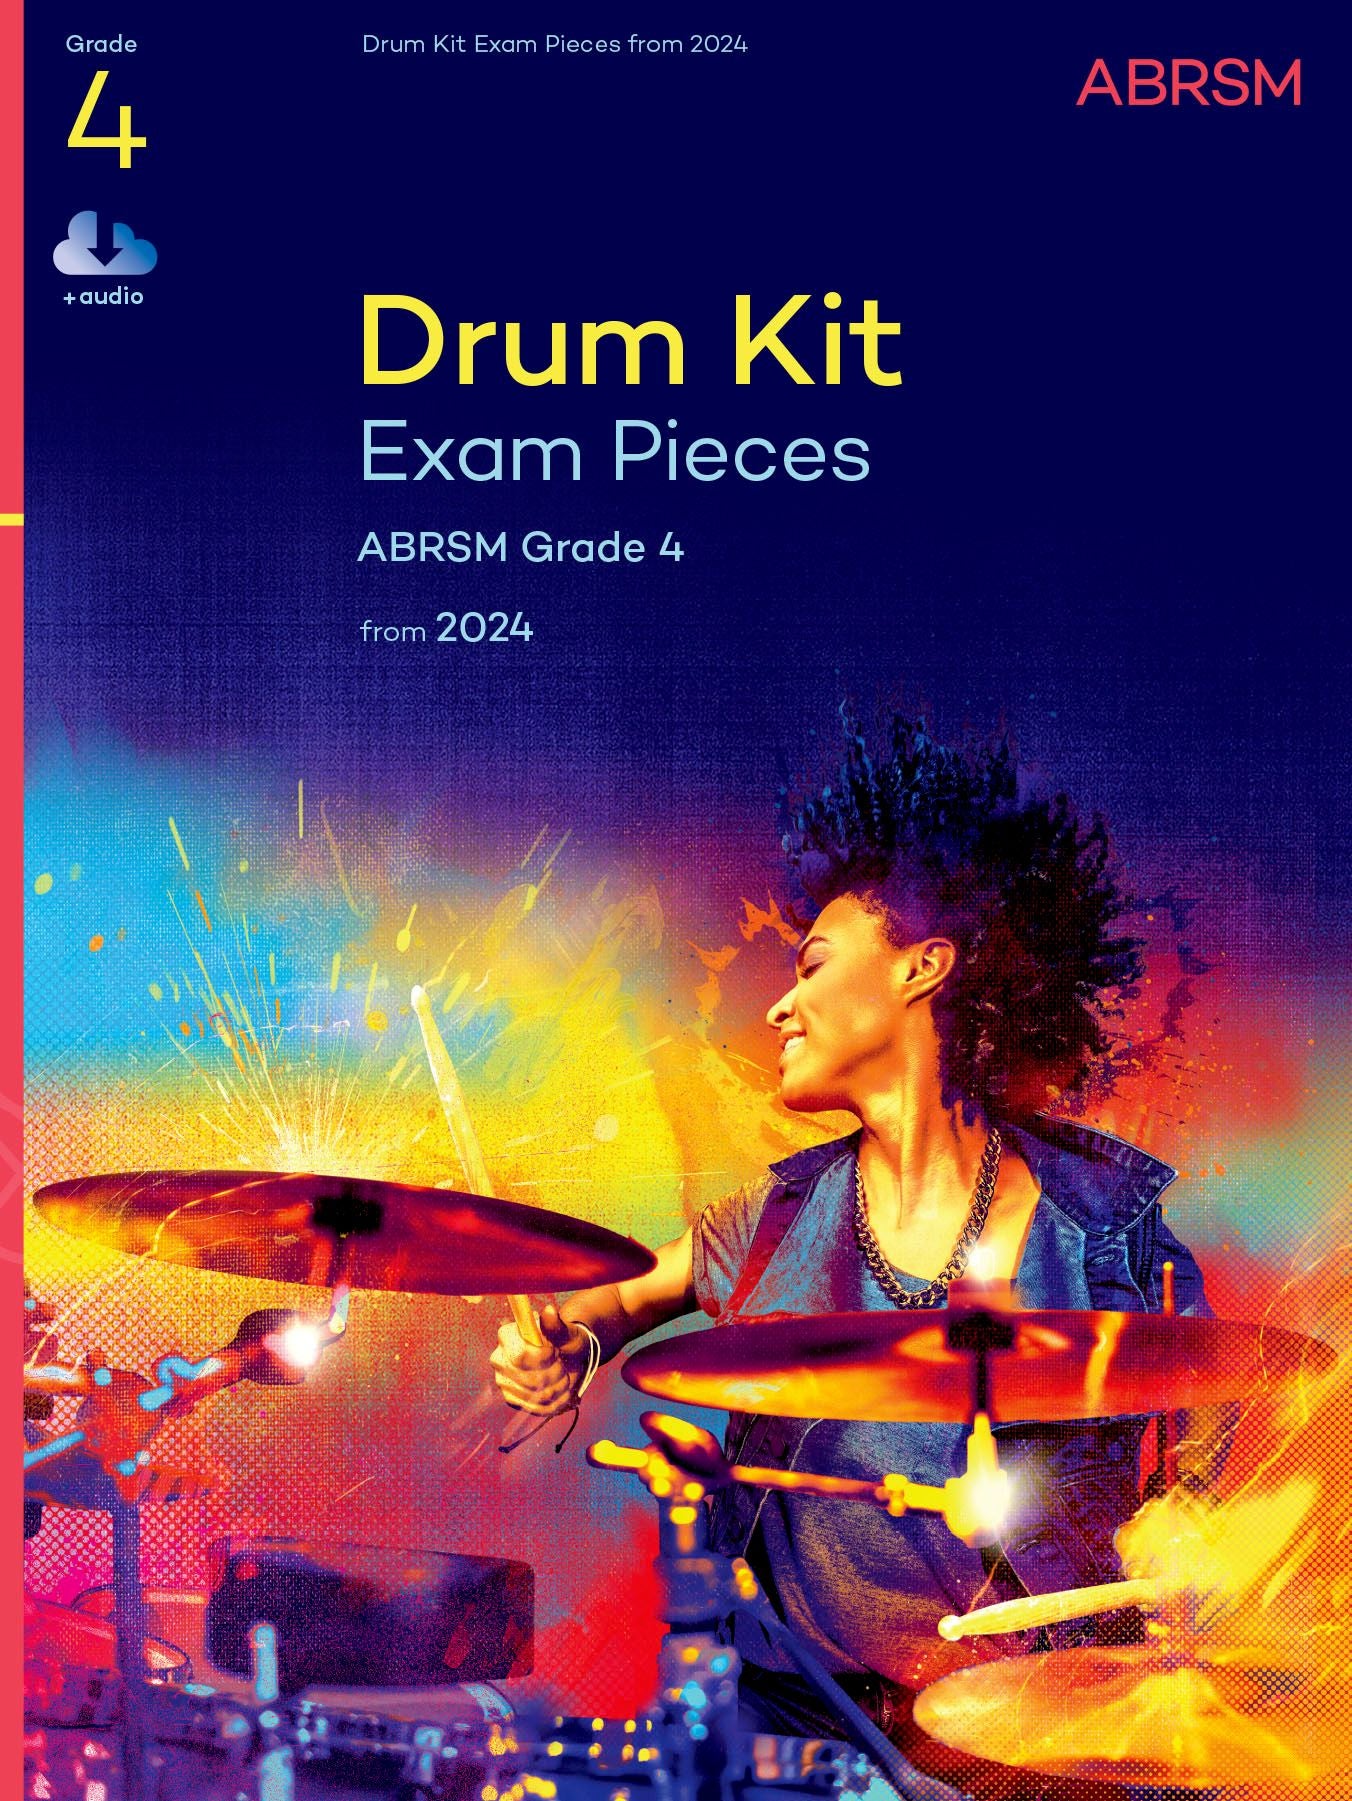 ABRSM Drum Kit Exam Pieces Grade 4 from 2024 (w/ Audio)